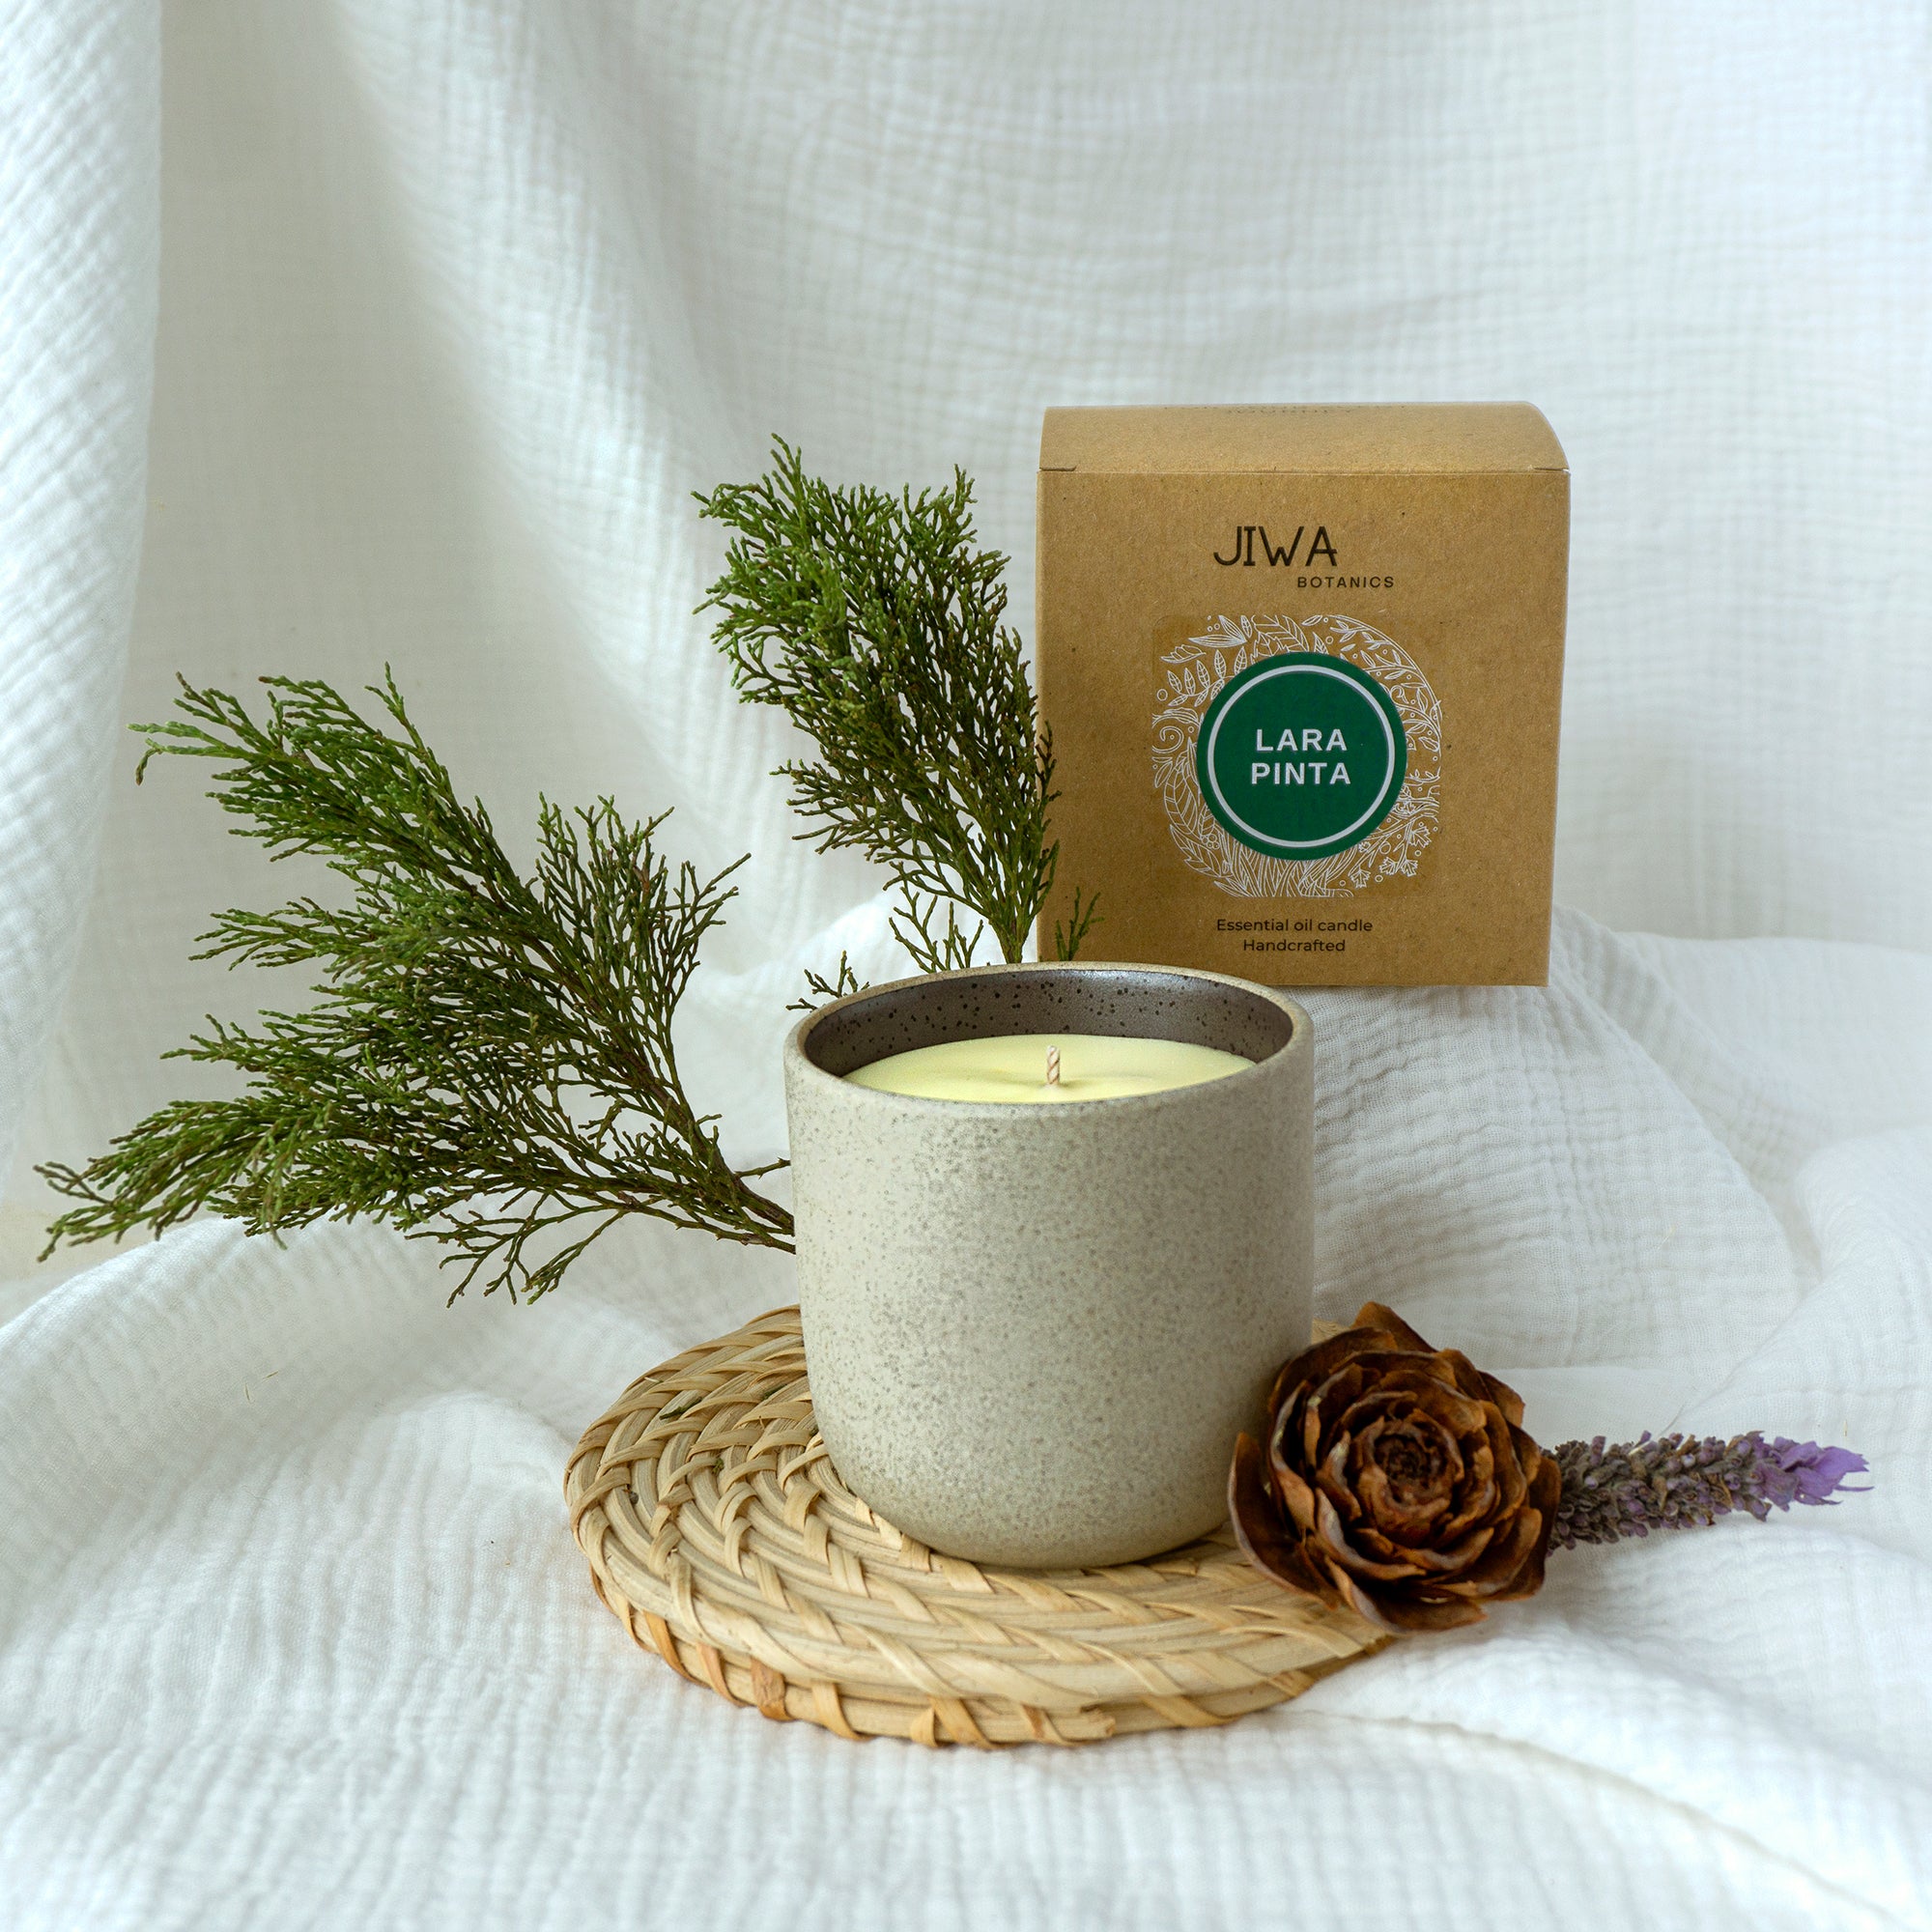 artisan handcrafted custom-blend aromatherapy essential-oil-candle larapinta fir-balsam eucalyptus-mandarin gift-pack australian-lavender coco-soy-candle fresh-earthy woody